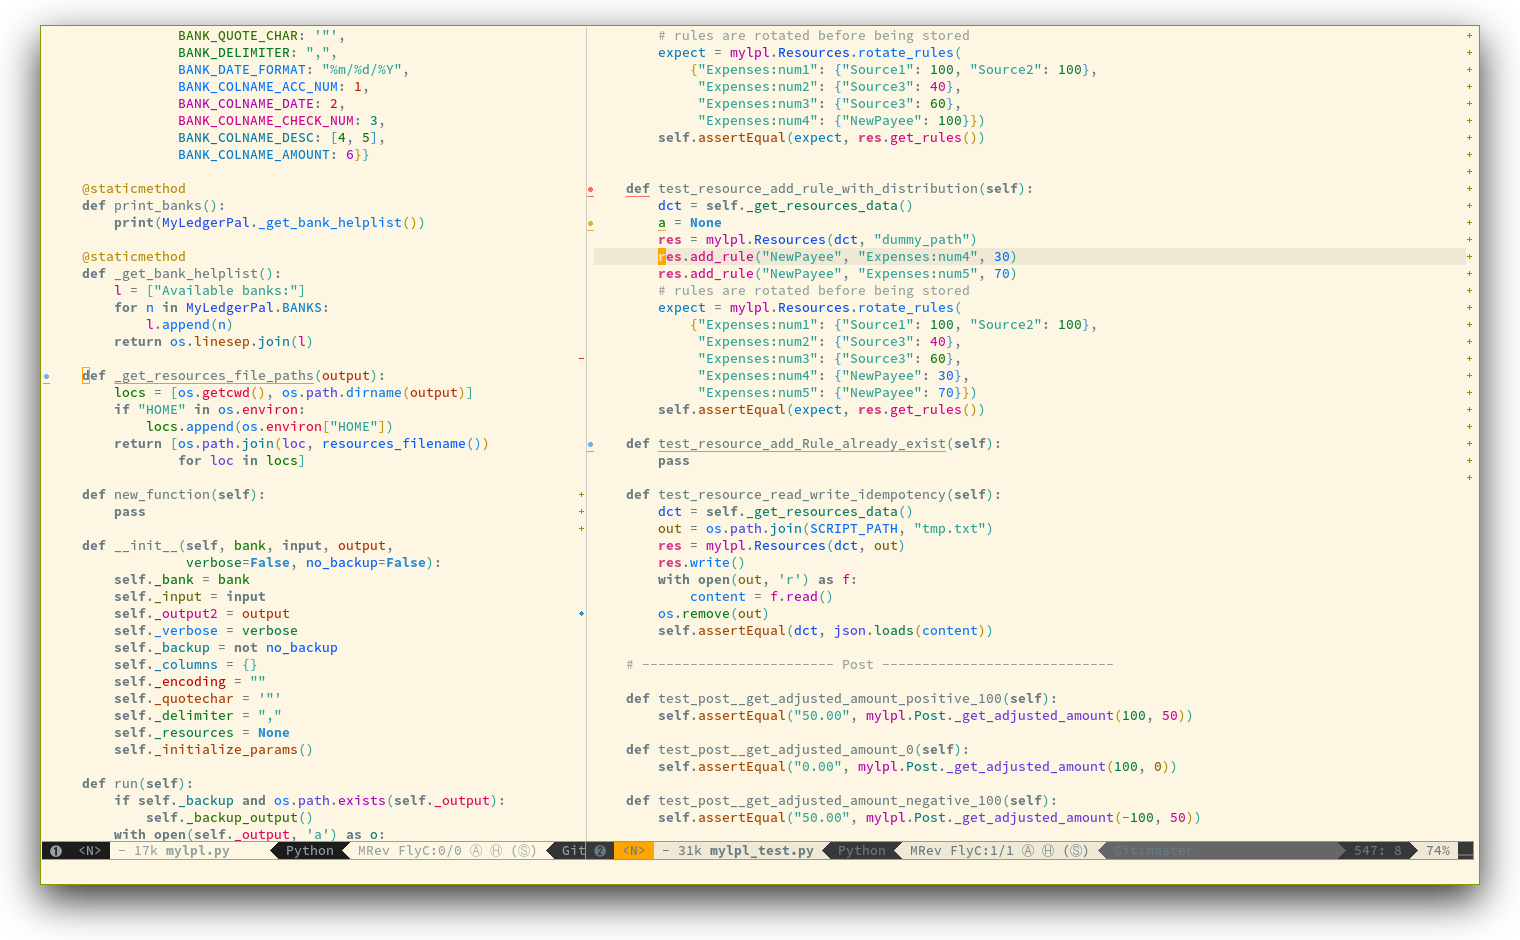 /TakeV/spacemacs/media/commit/13c5b1d24b7dab52d78aa236786cc6d4f3724d0a/layers/colors/img/theme-tweaks-python.png